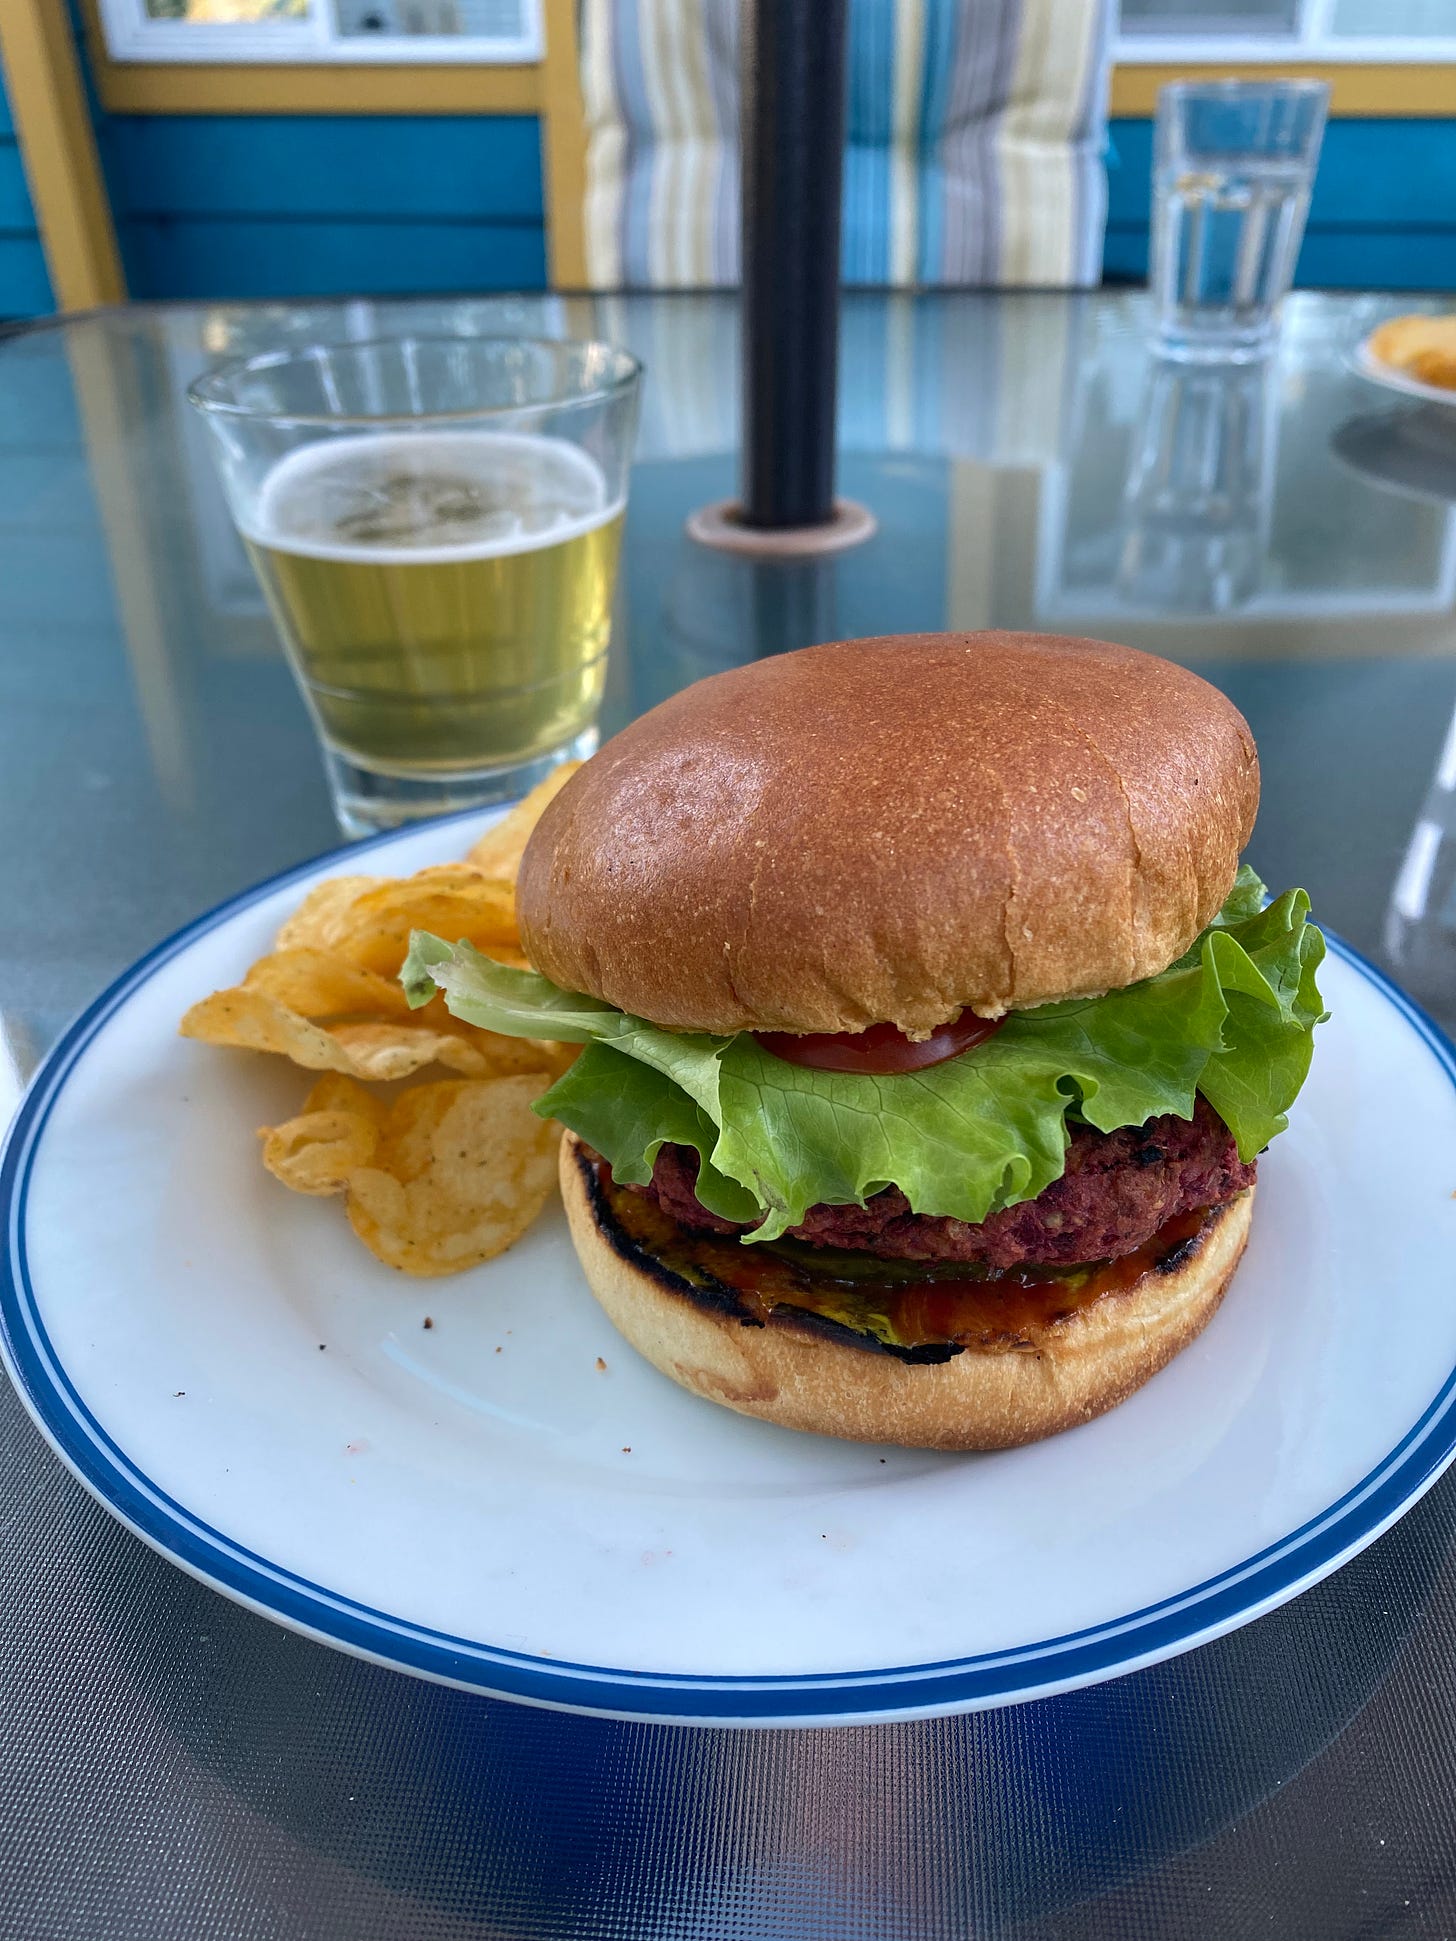 A white plate with a blue rim on a glass patio table; on the plate is a beet burger on a brioche bun with lettuce, tomato, and pickles just visible. Next to the burger is a small pile of spicy pickle chips, and behind the plate is a glass of lager.